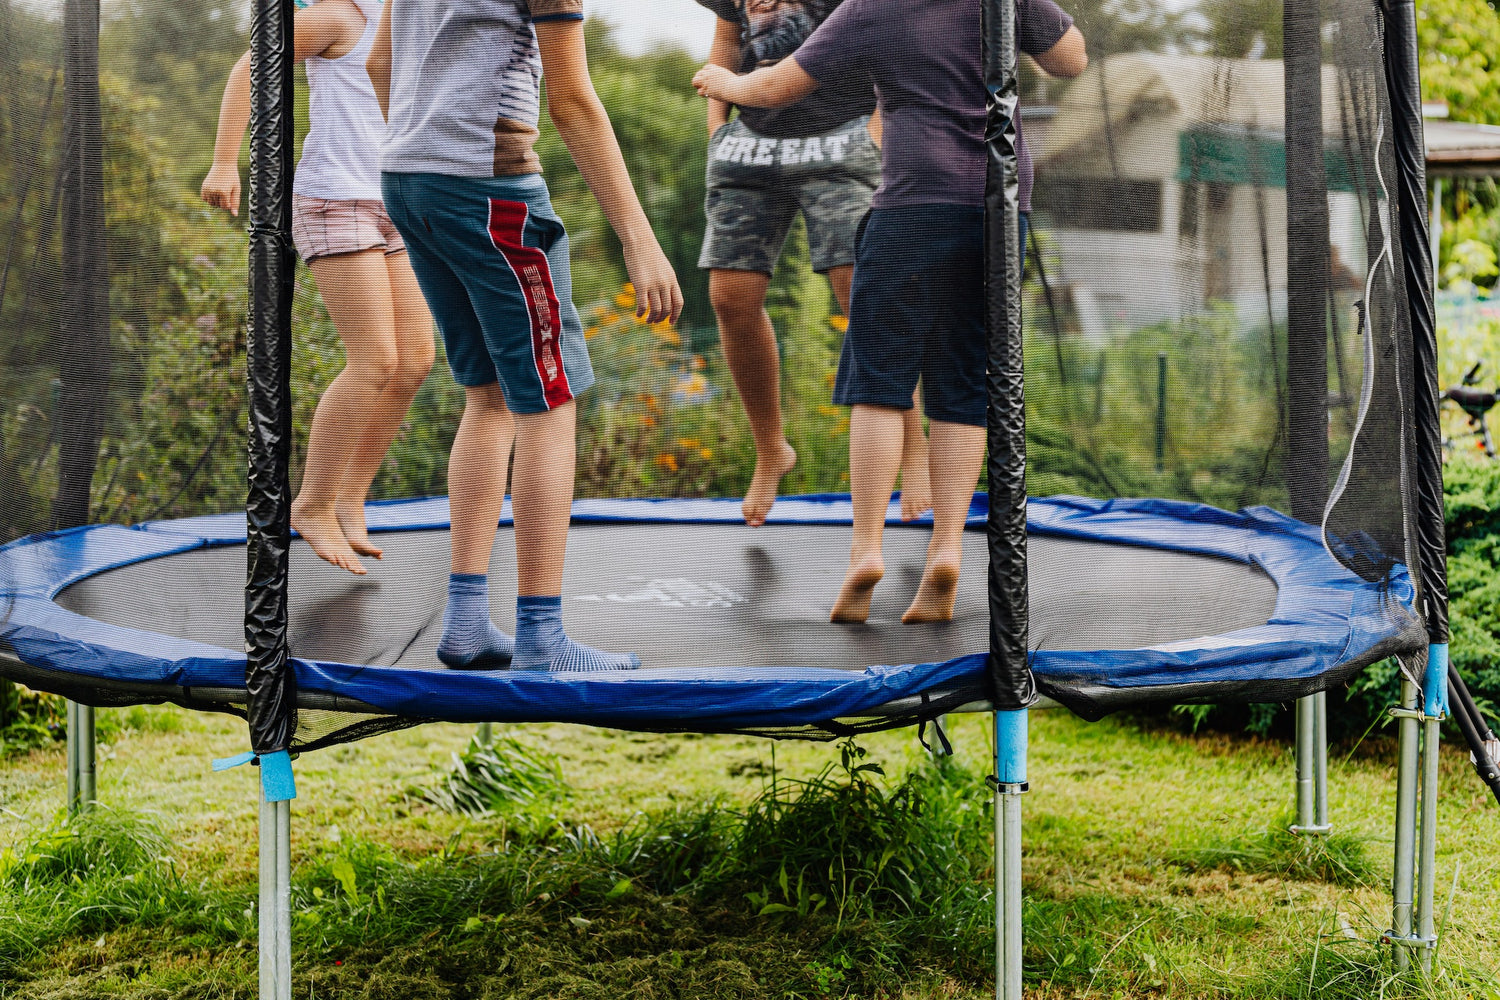 How to choose the right trampoline for your needs and space